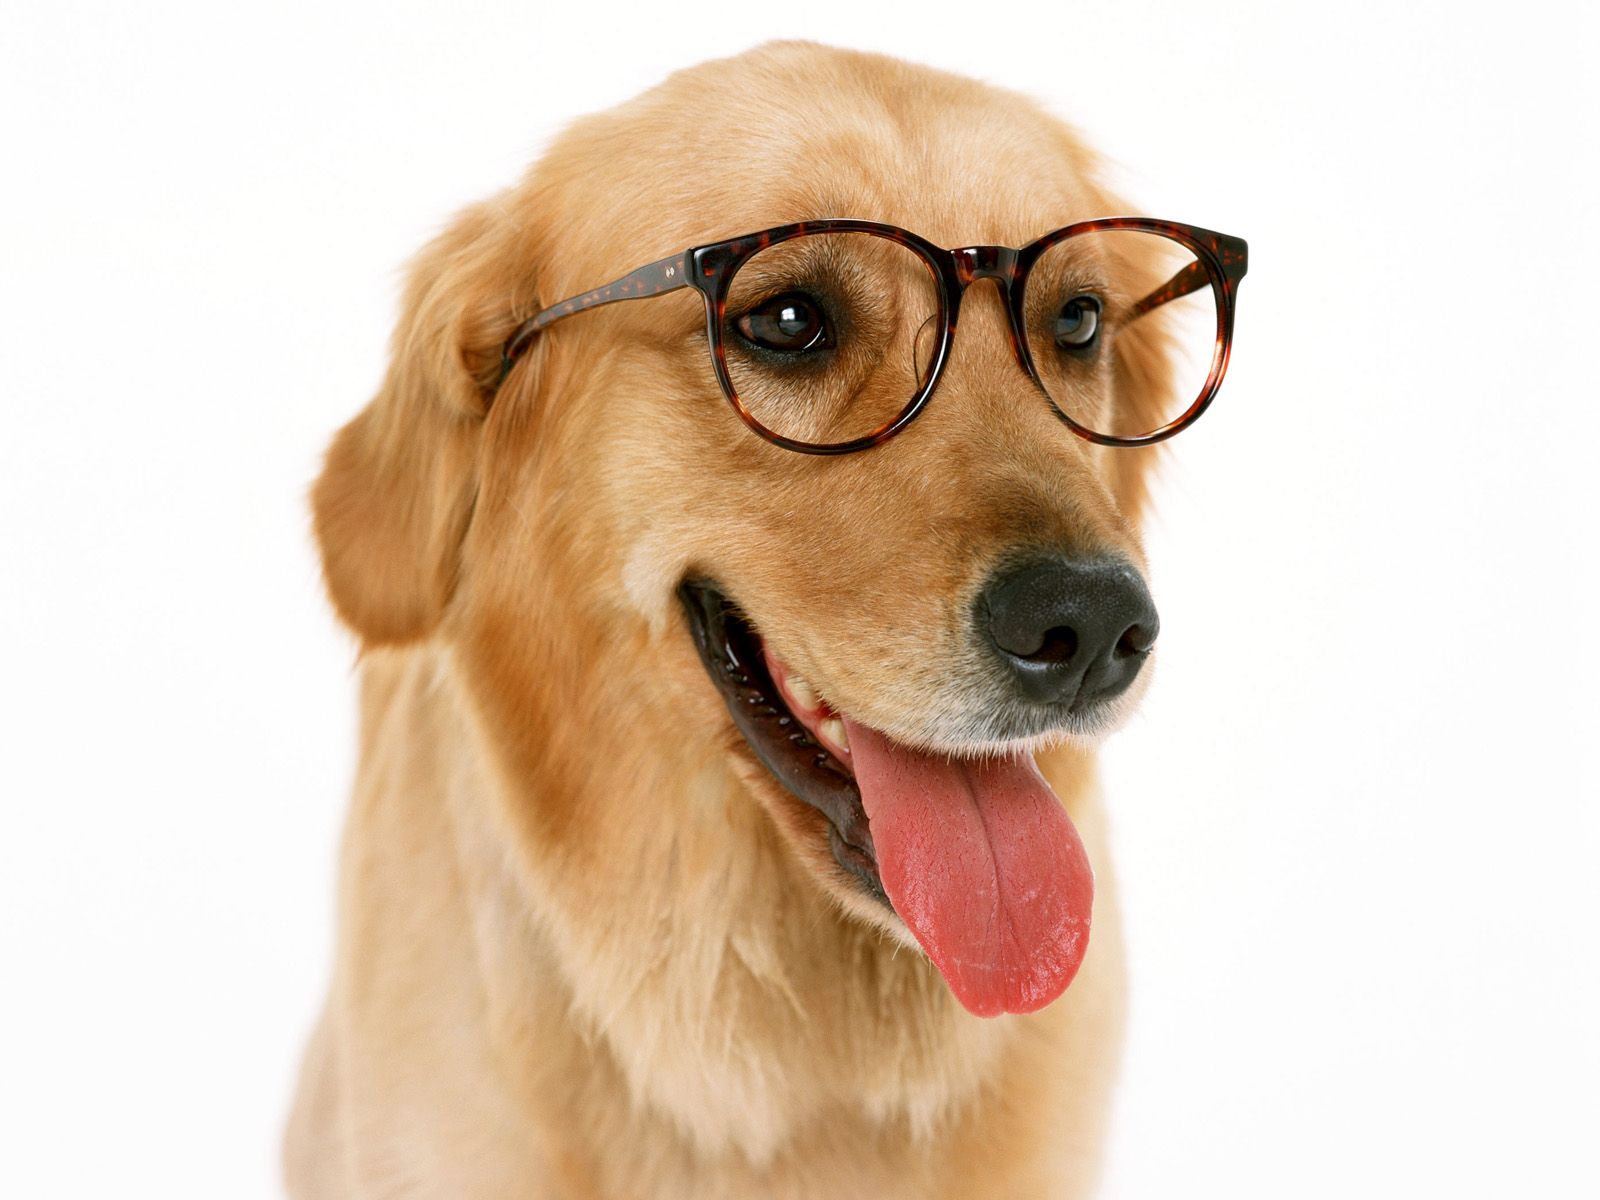 Funny Dog Wearing Glass - Dog With Glasses , HD Wallpaper & Backgrounds